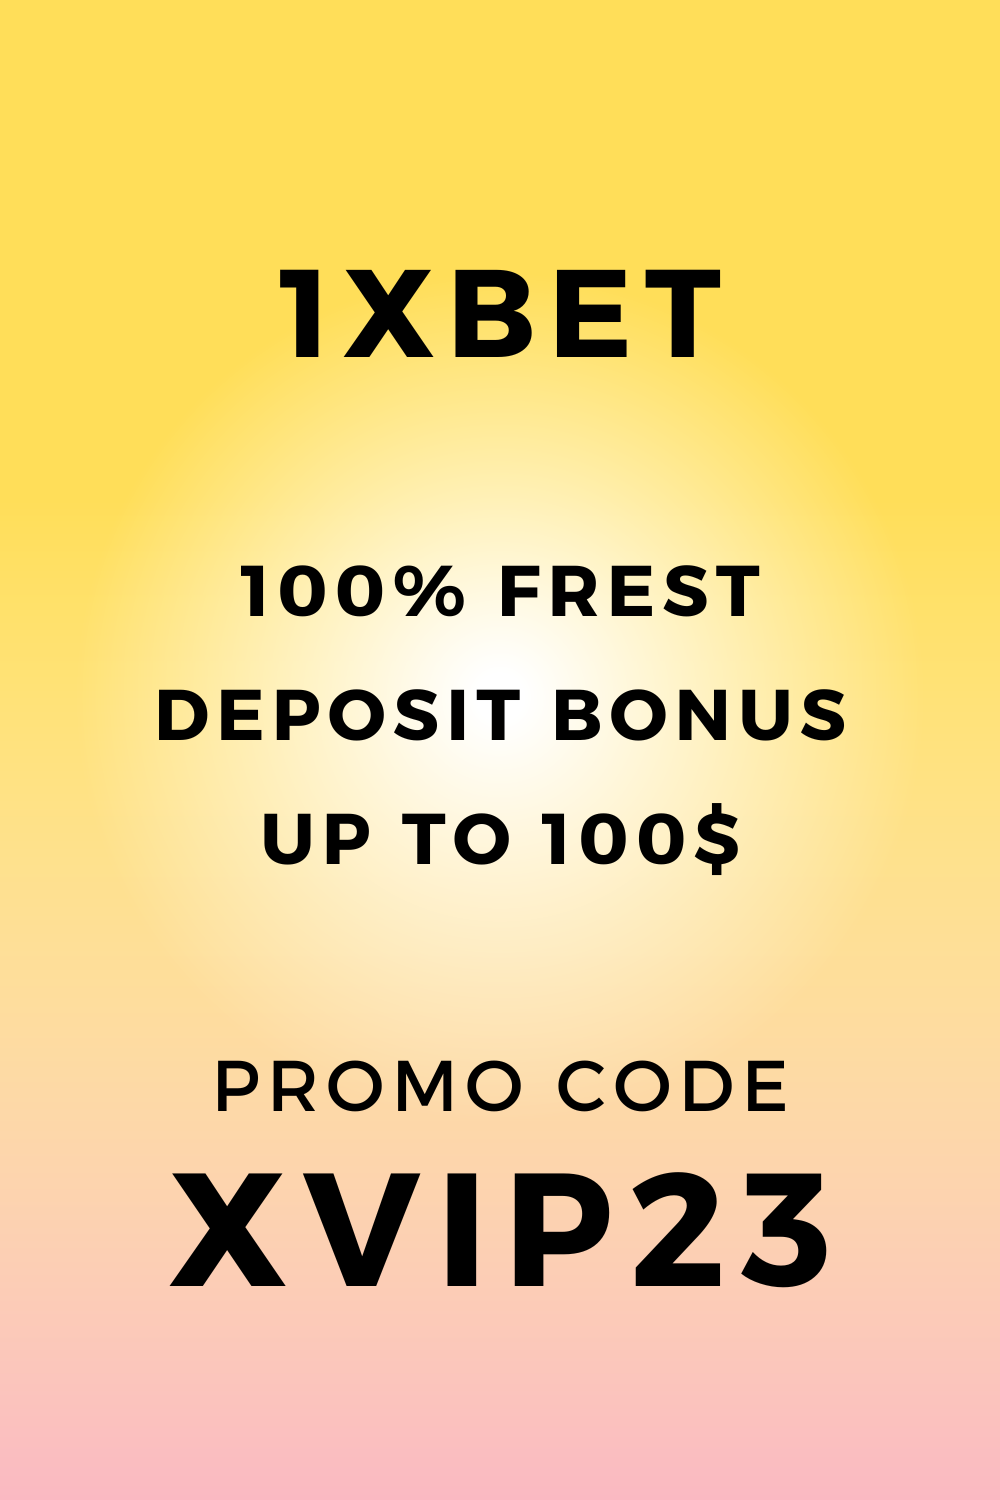 1xbet promo code use 2023.png